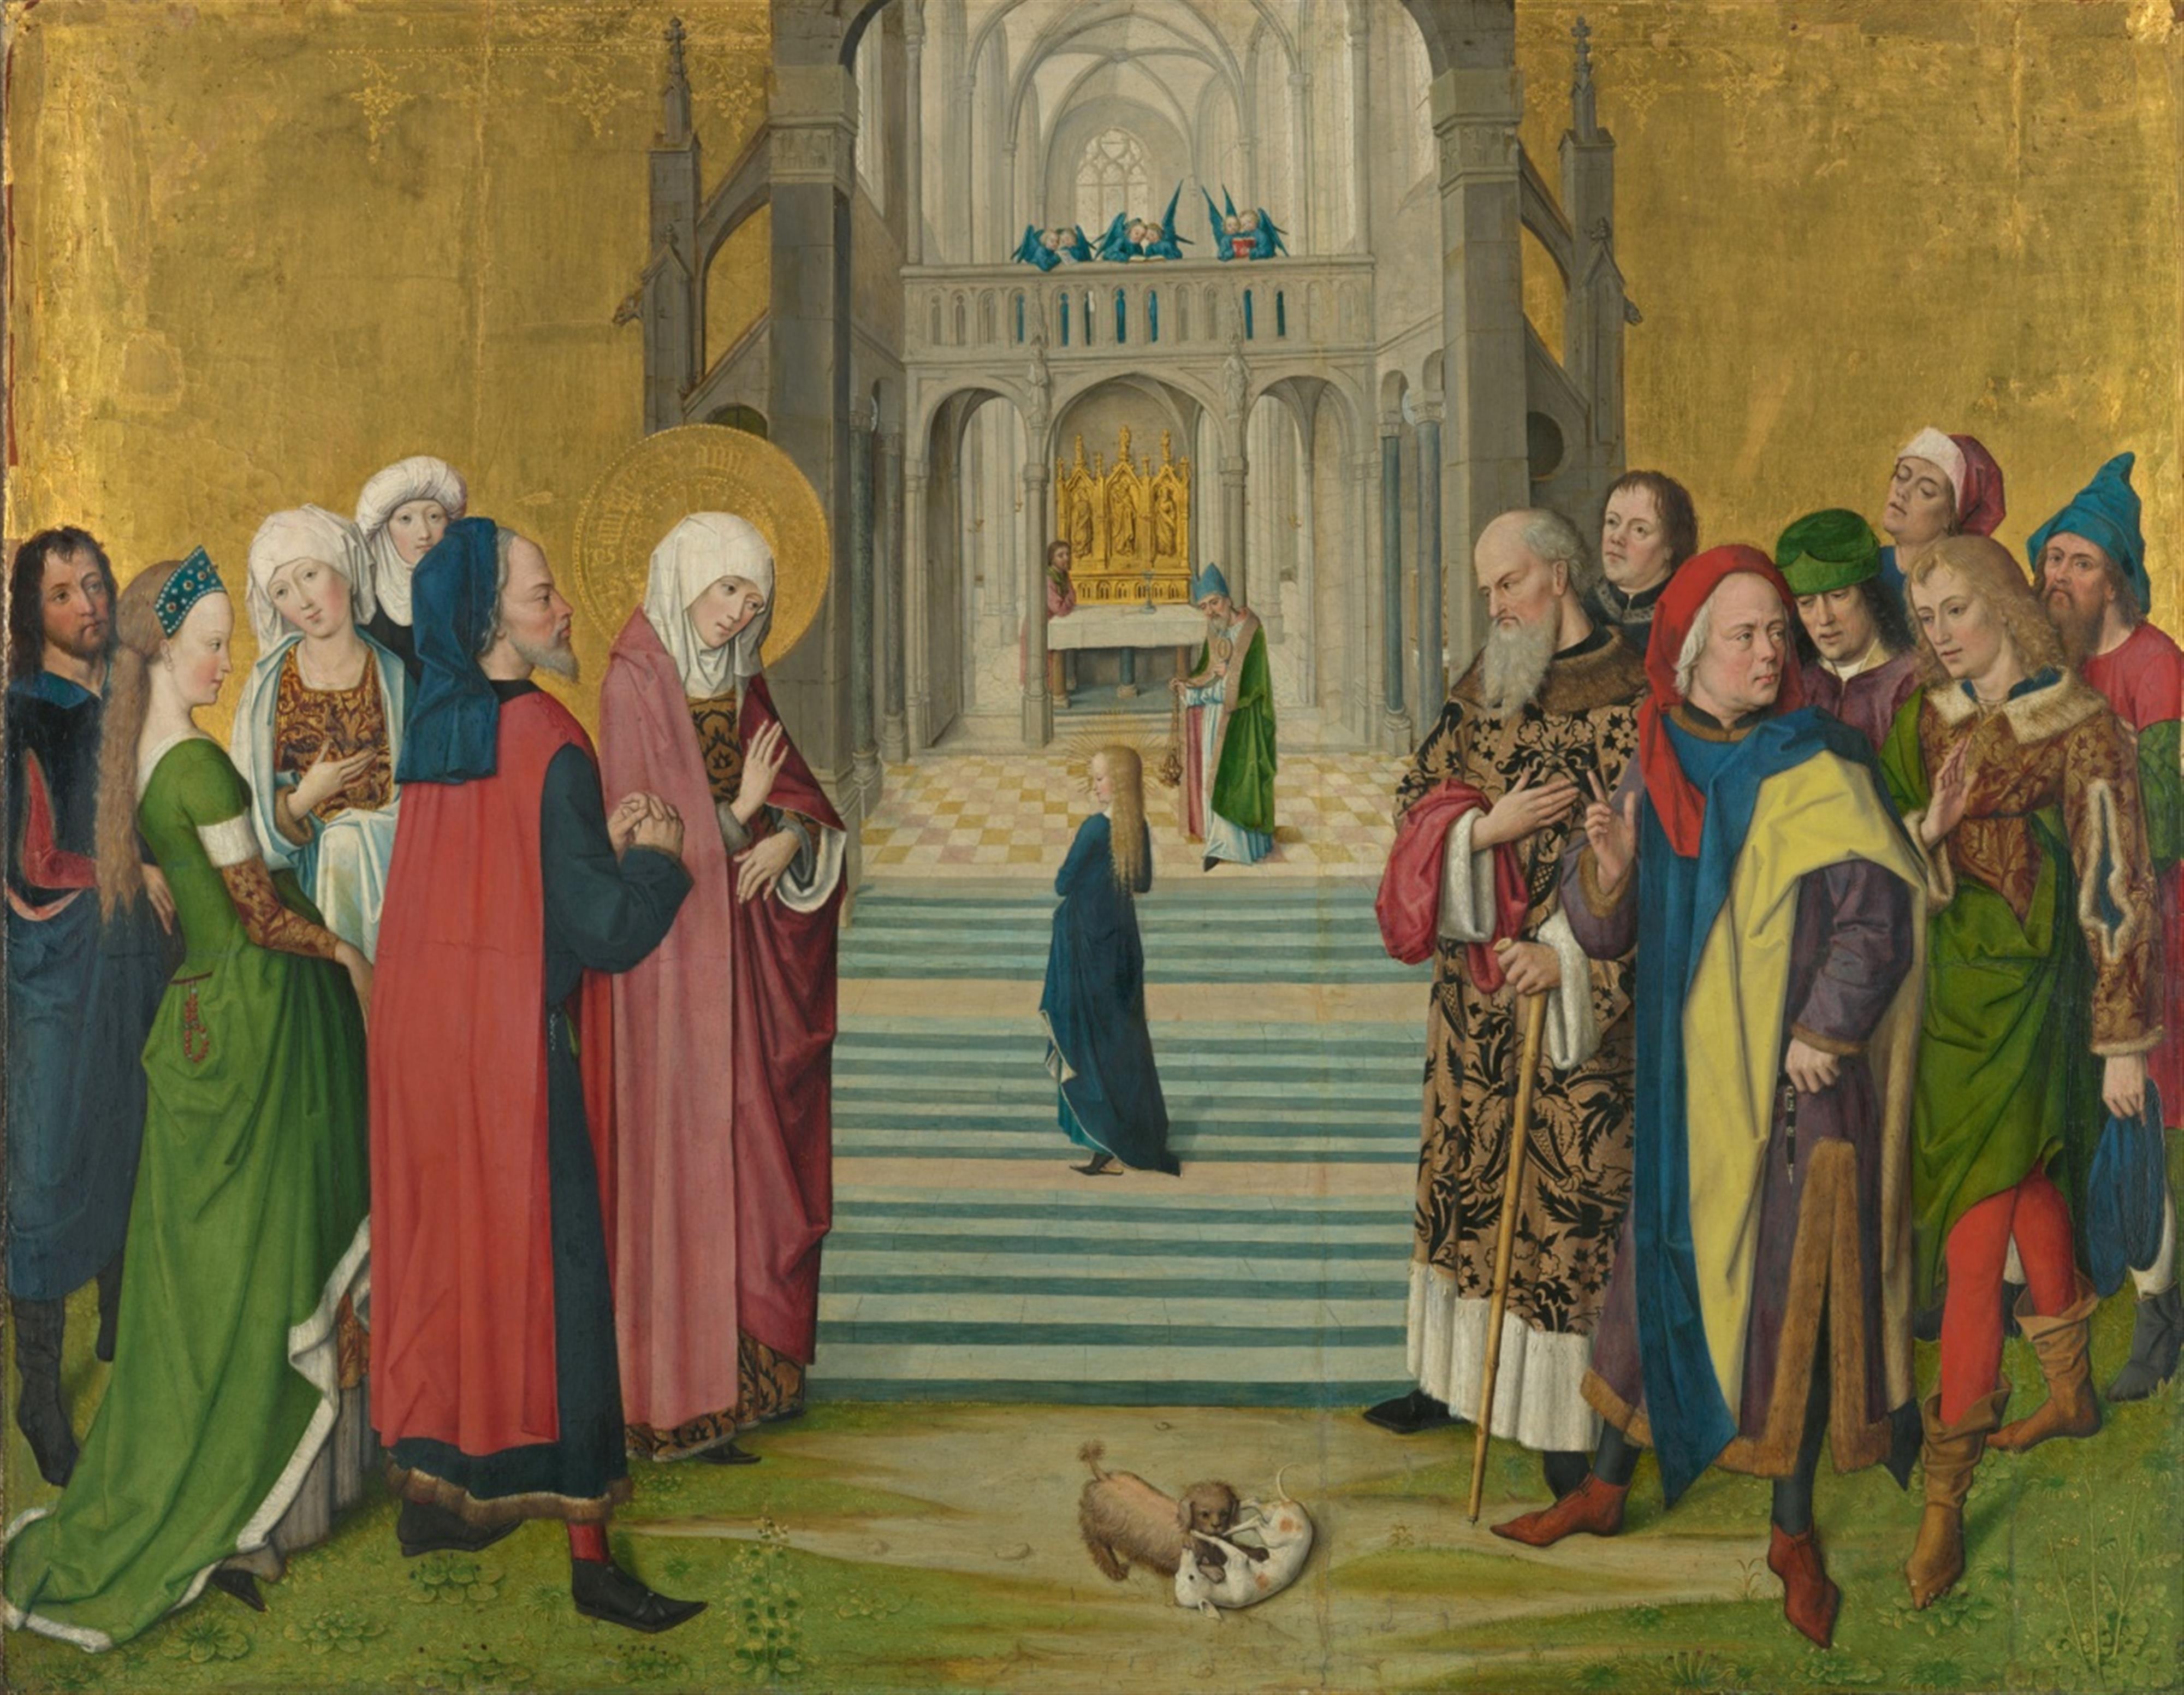 Cologne School circa 1500 - The Presentation of the Virgin Mary at the Temple - image-2